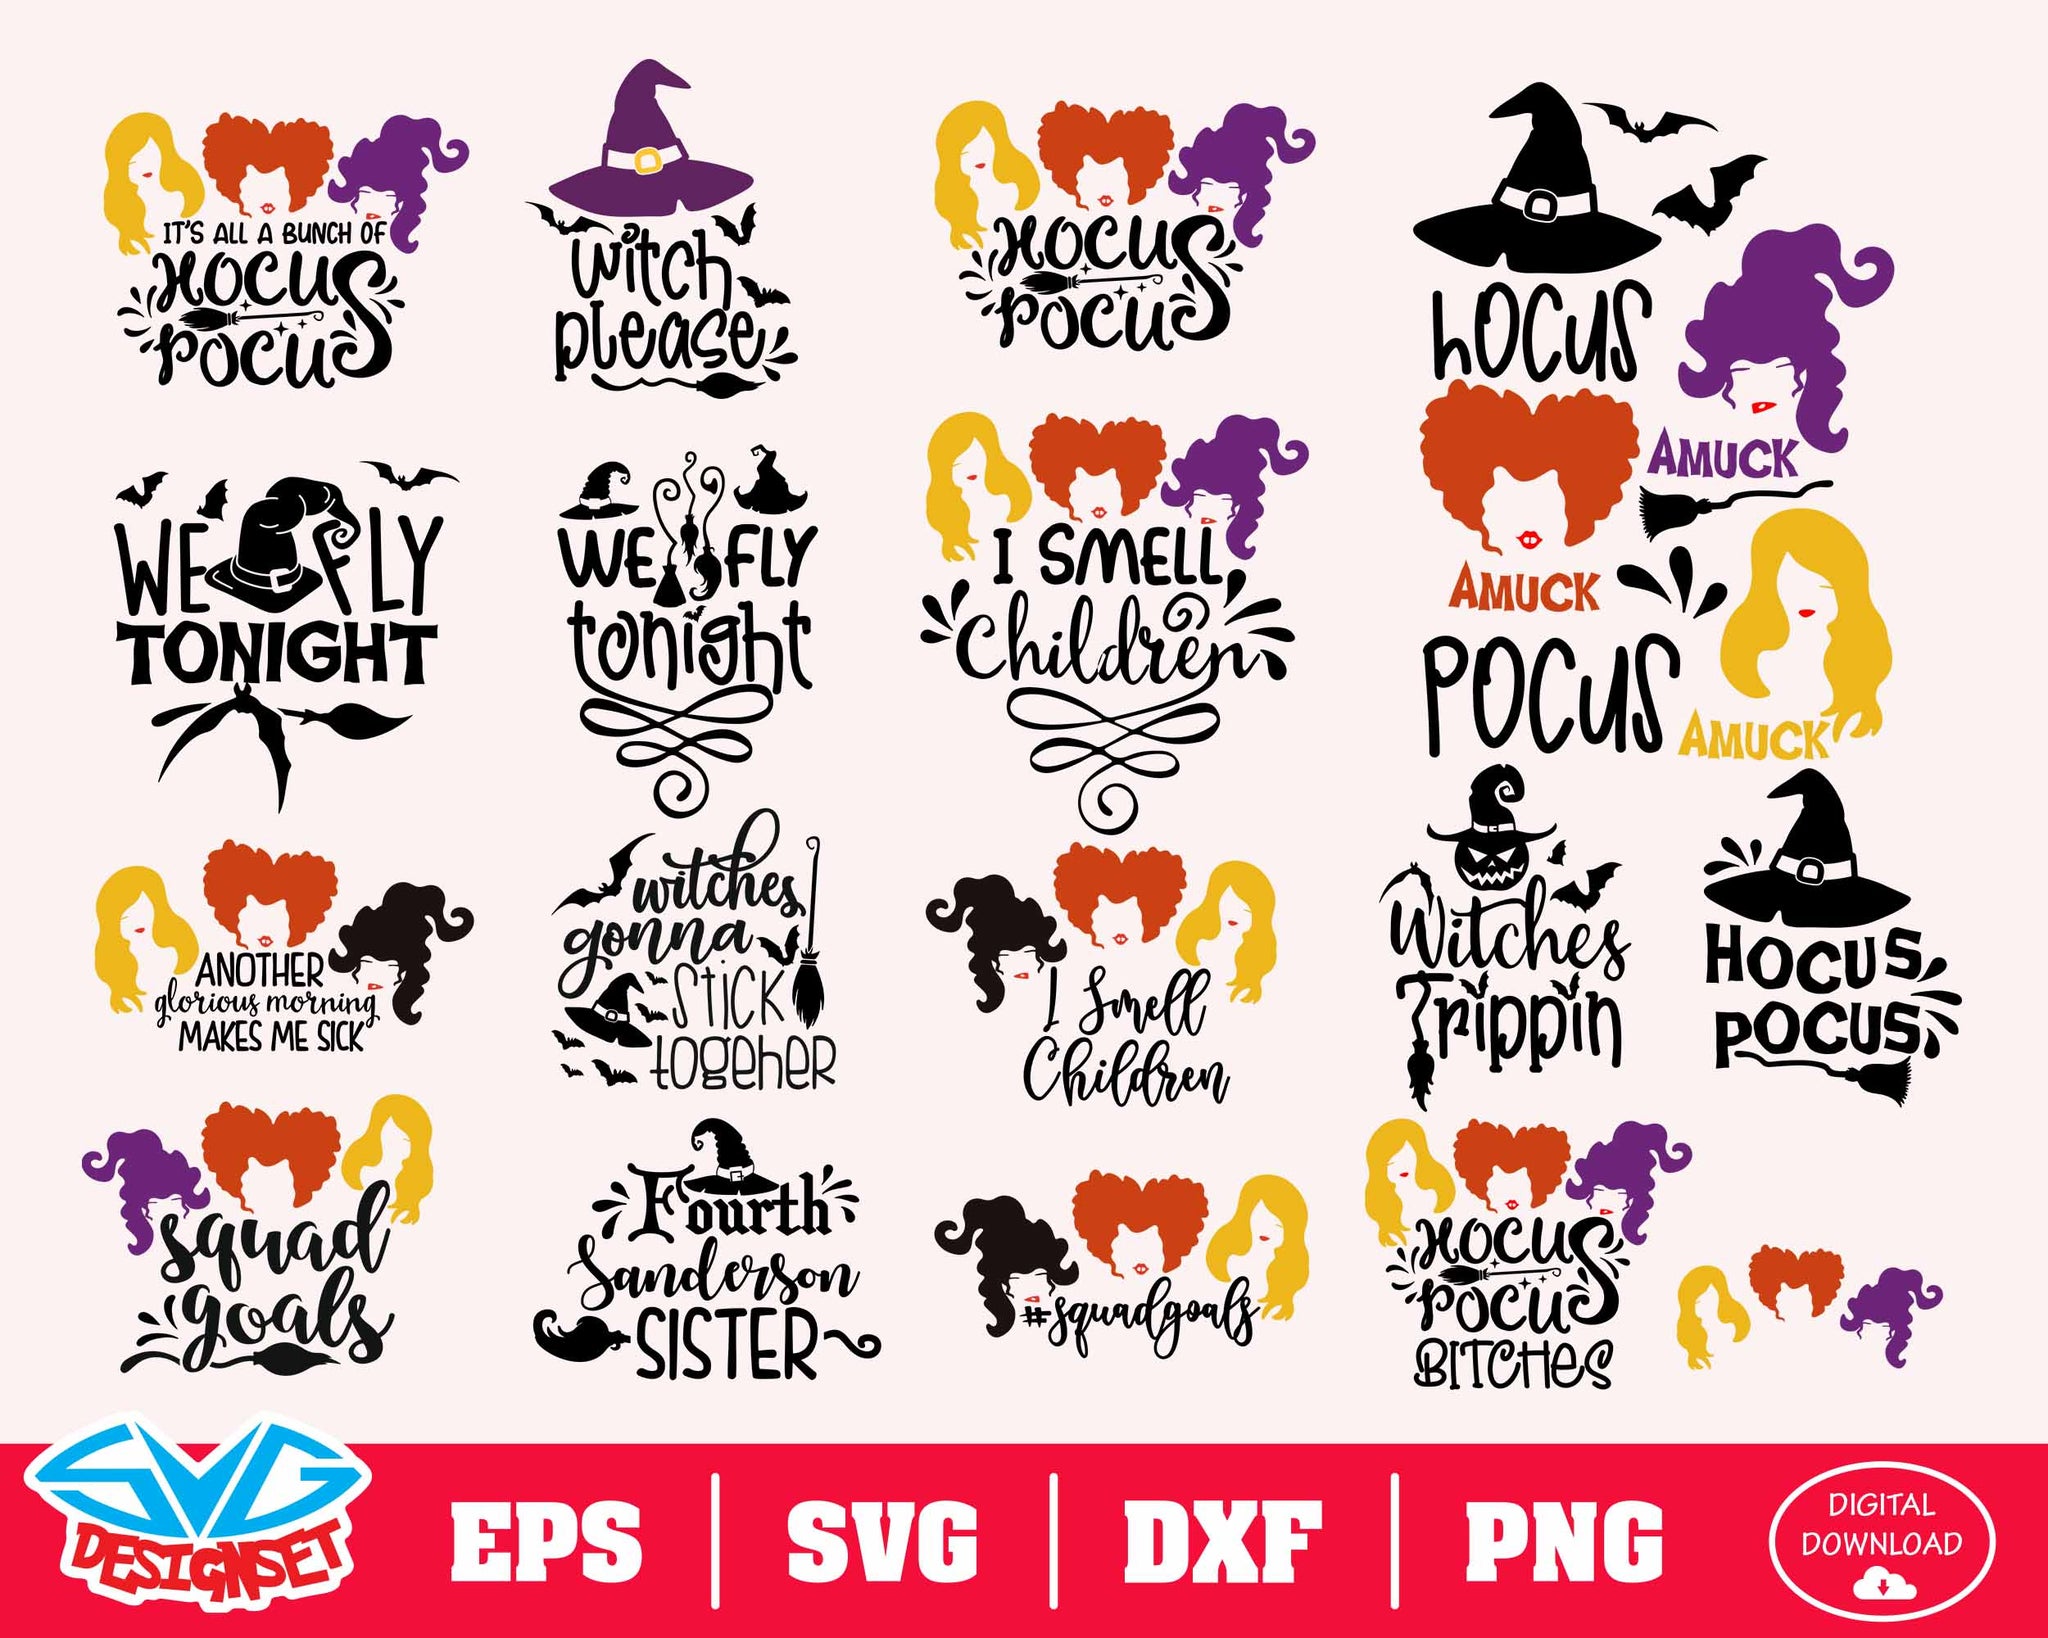 Hocus pocus Svg, Dxf, Eps, Png, Clipart, Silhouette and Cutfiles #3 - SVGDesignSets